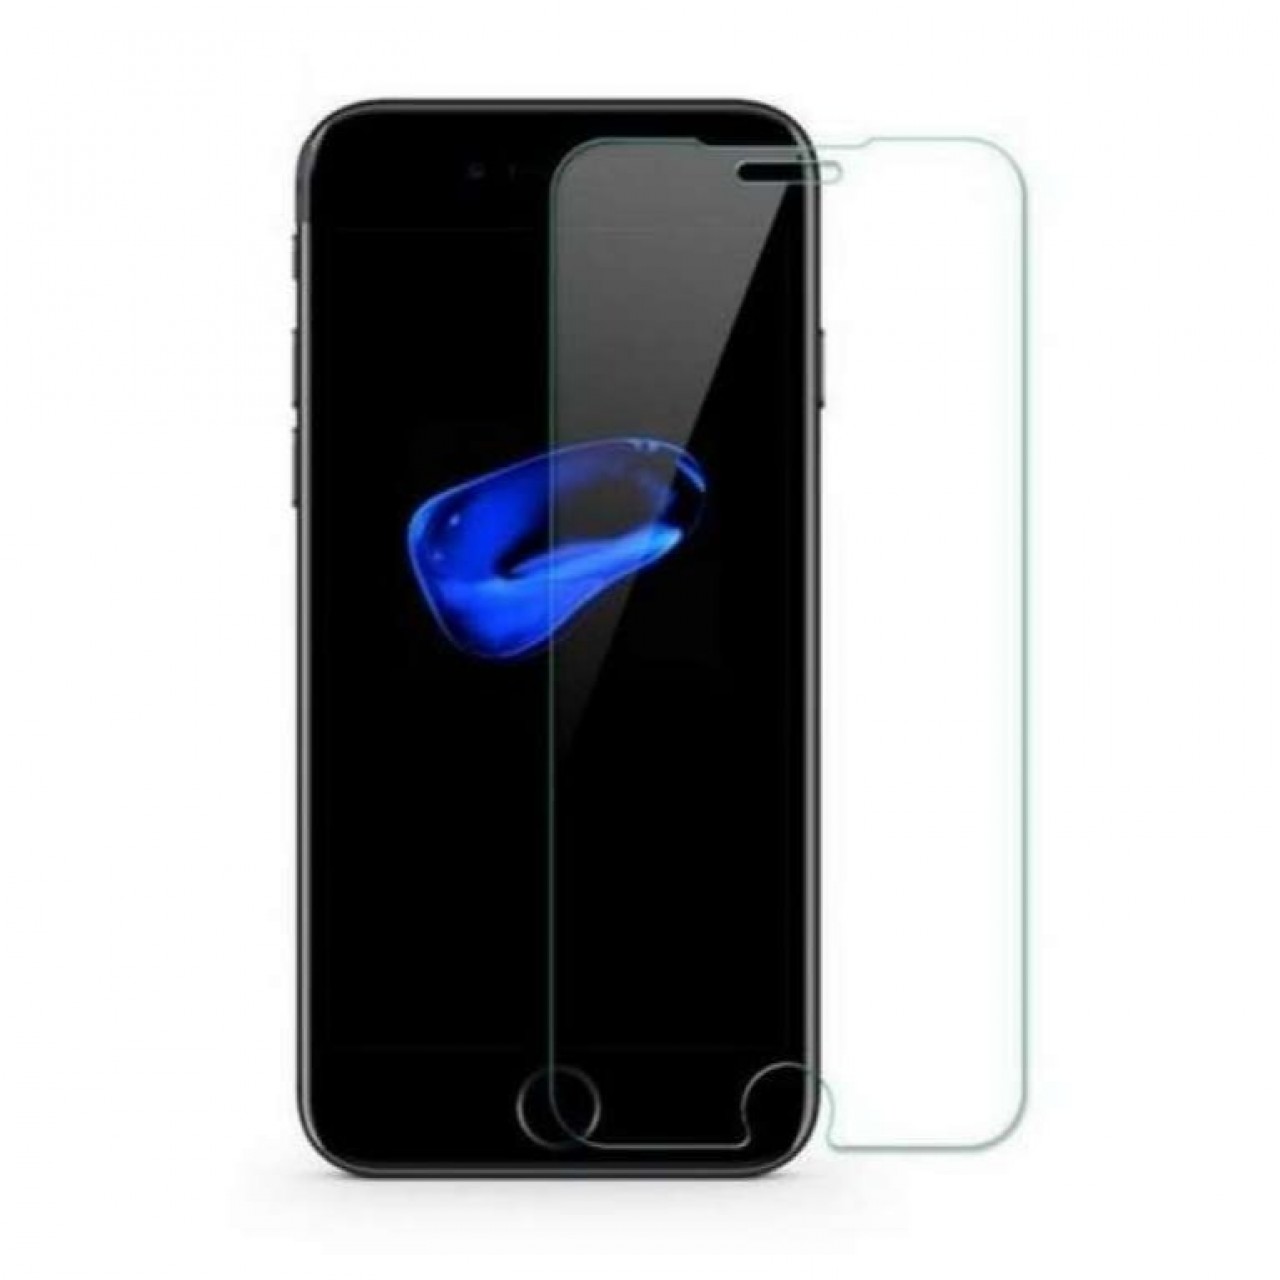 Tempered & Polished Glass Screen Protector - iPhone 7 plus